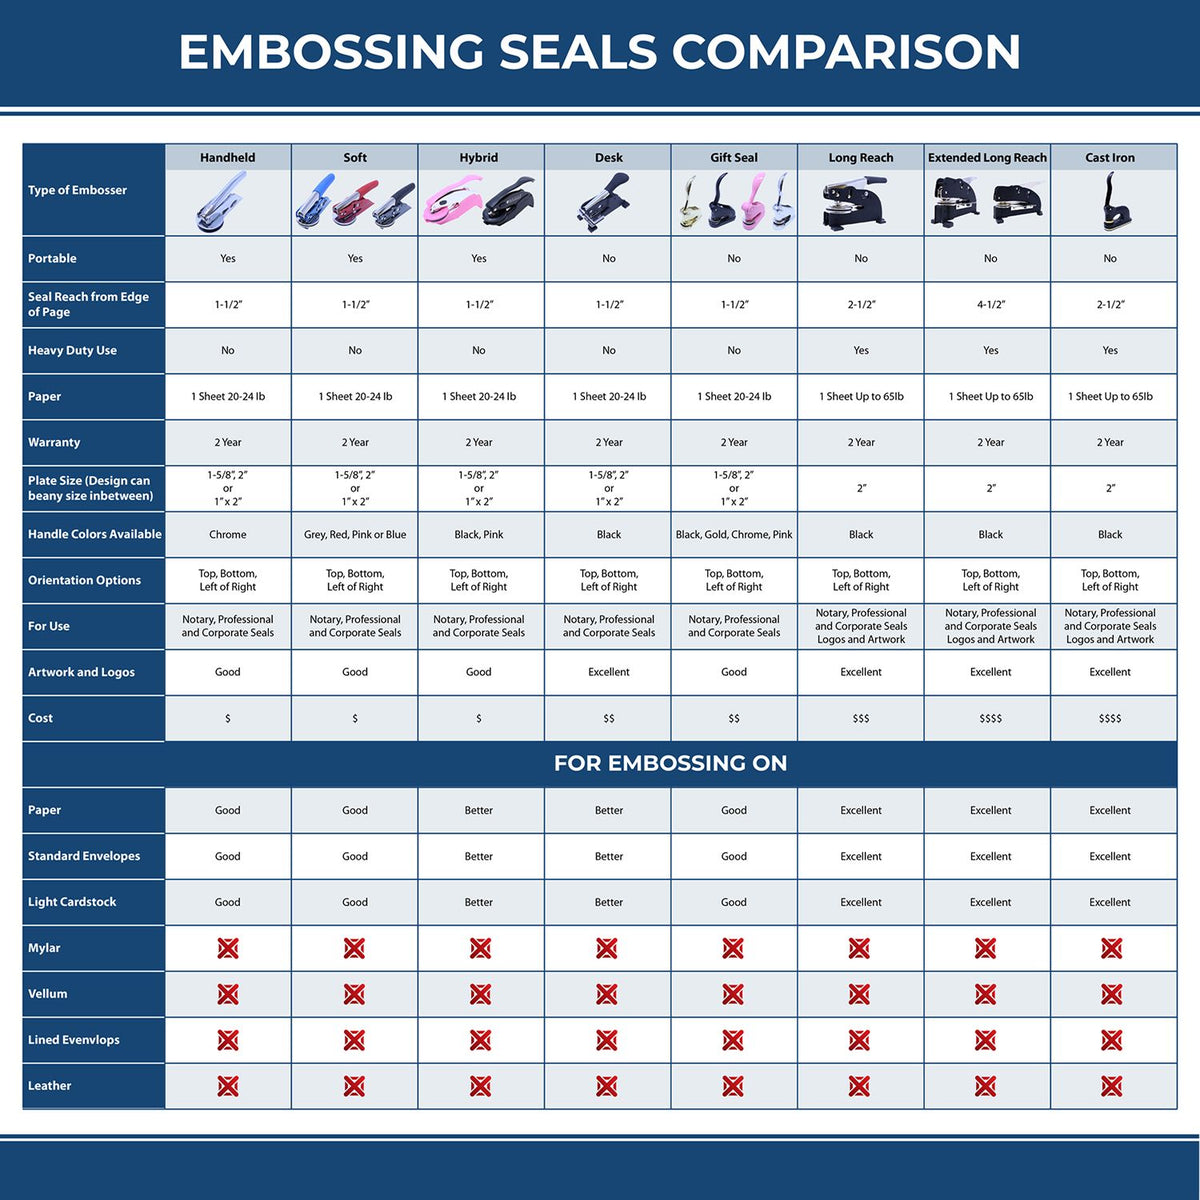 A comparison chart for the different types of mount models available for the Missouri Desk Surveyor Seal Embosser.